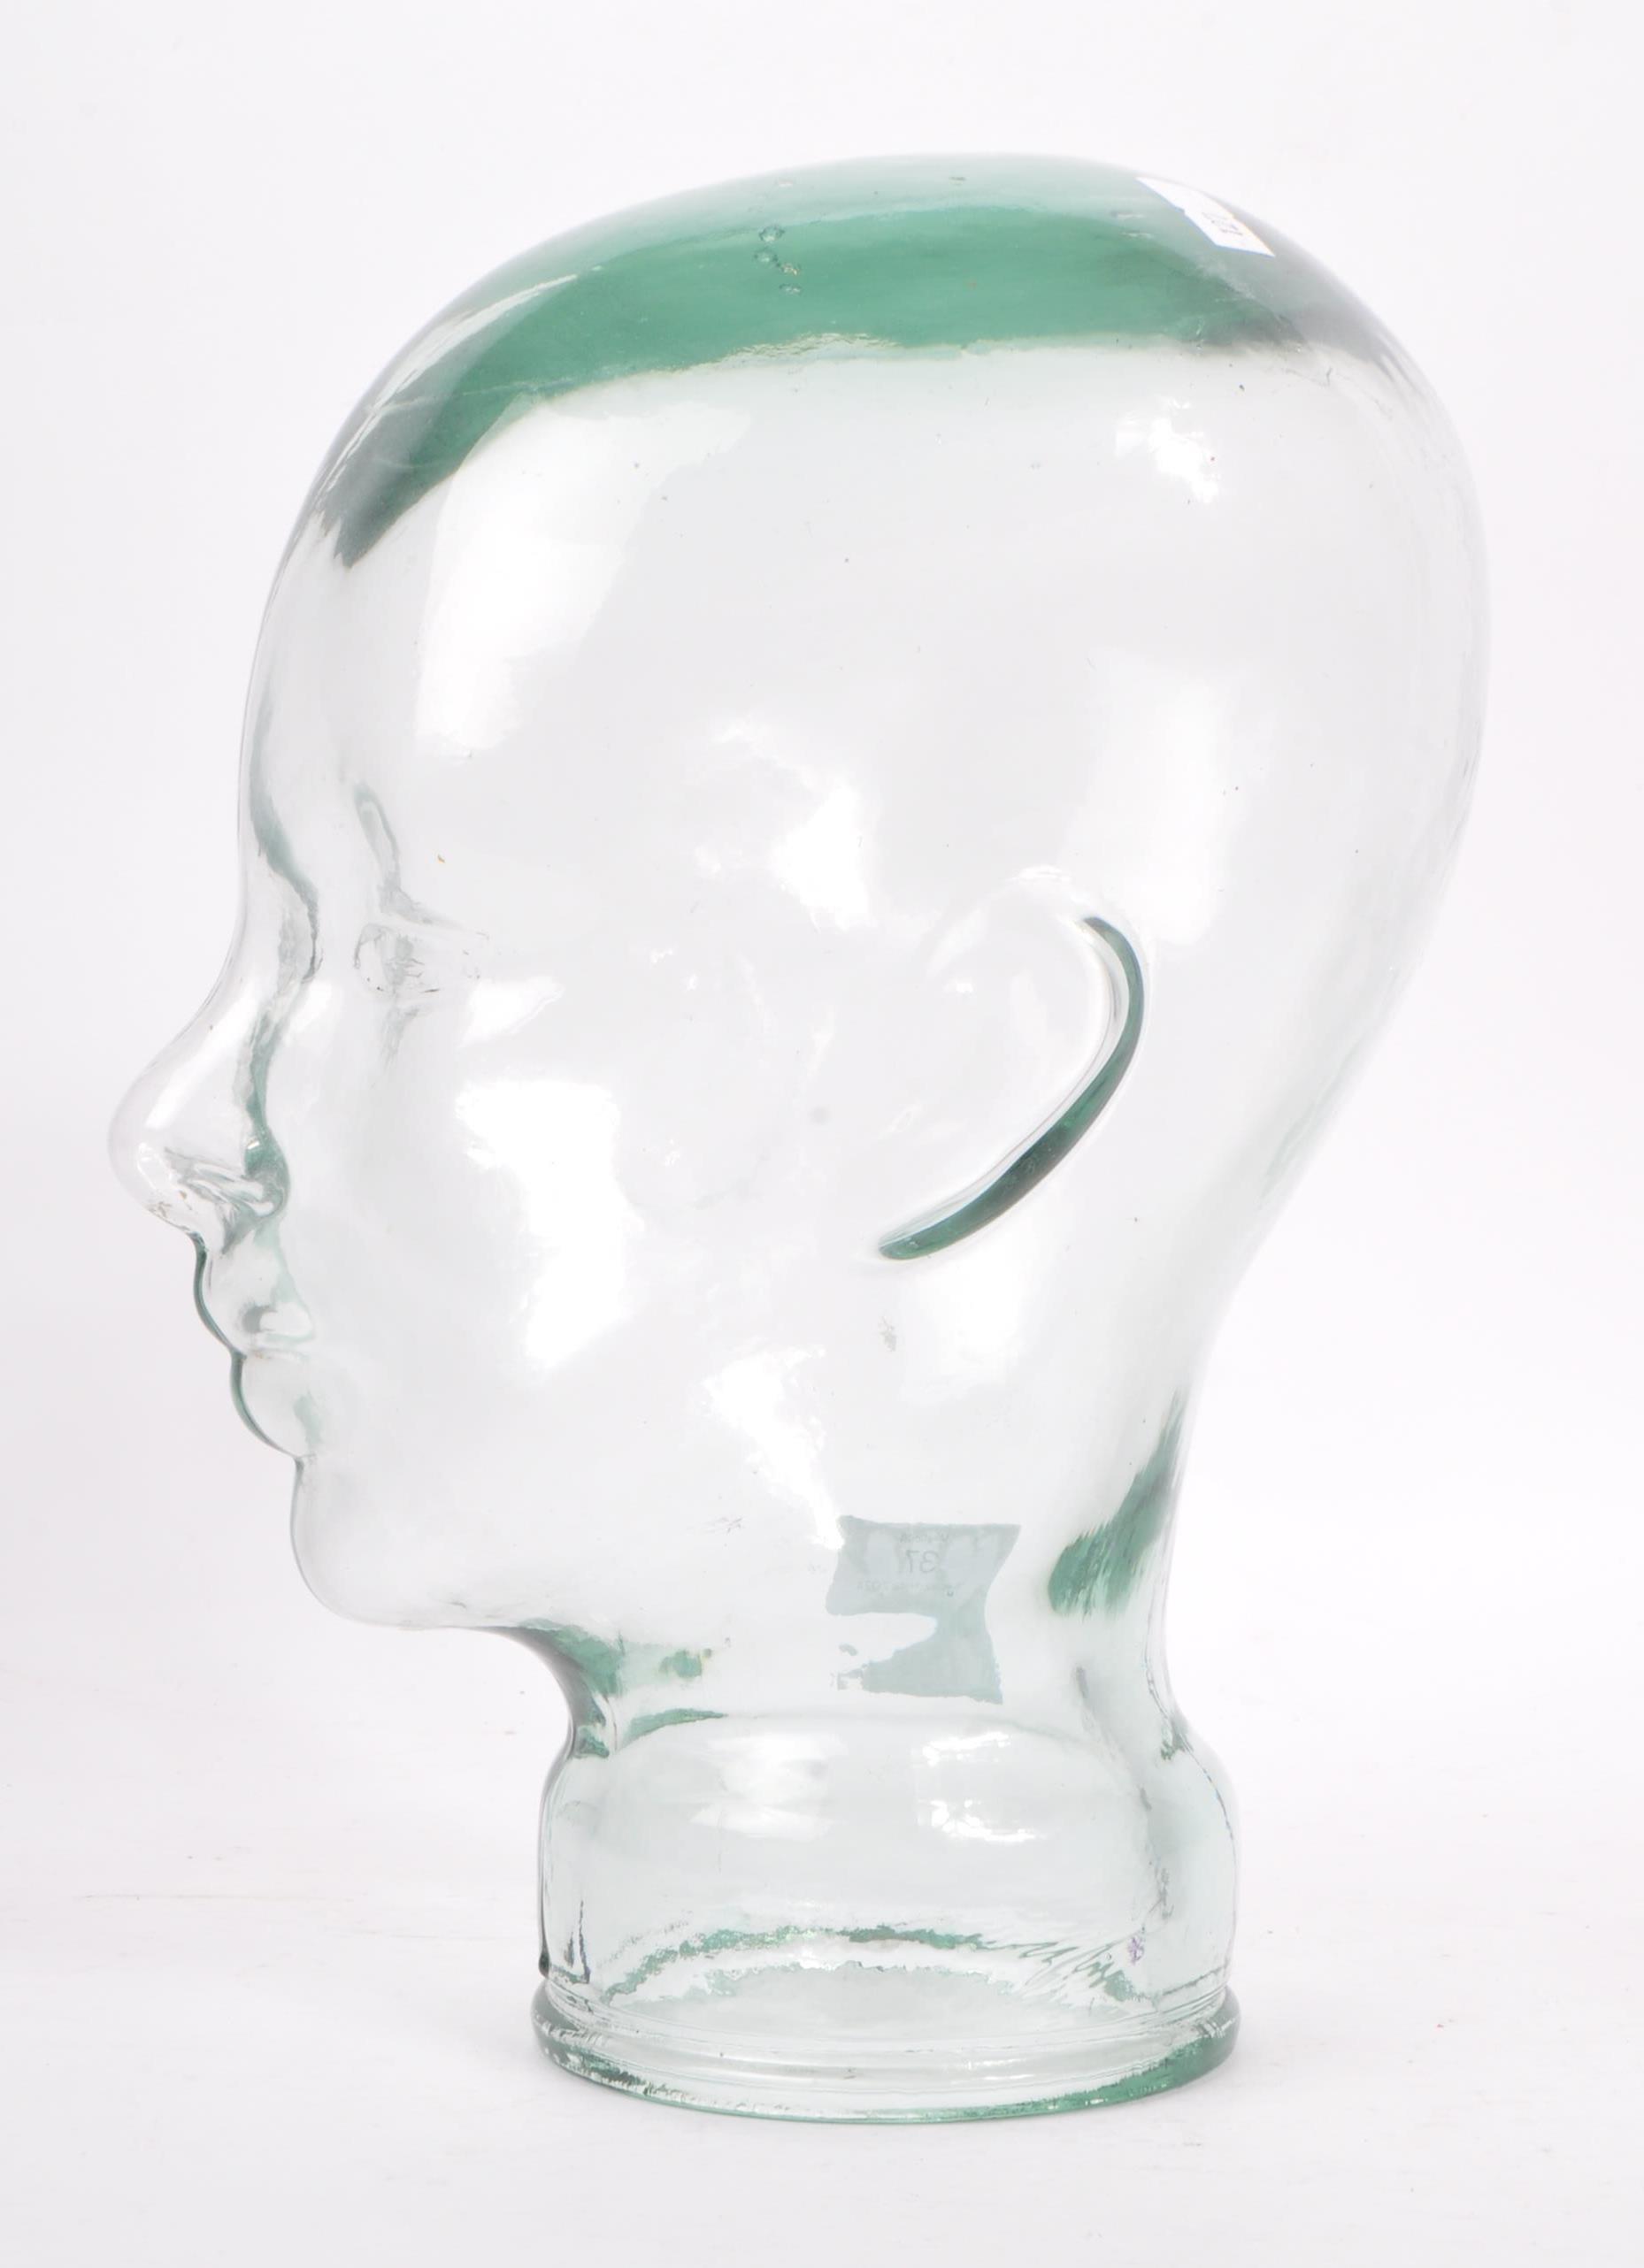 20TH CENTURY CLEAR GLASS MILLINERY PRESSED HEAD - Image 2 of 5